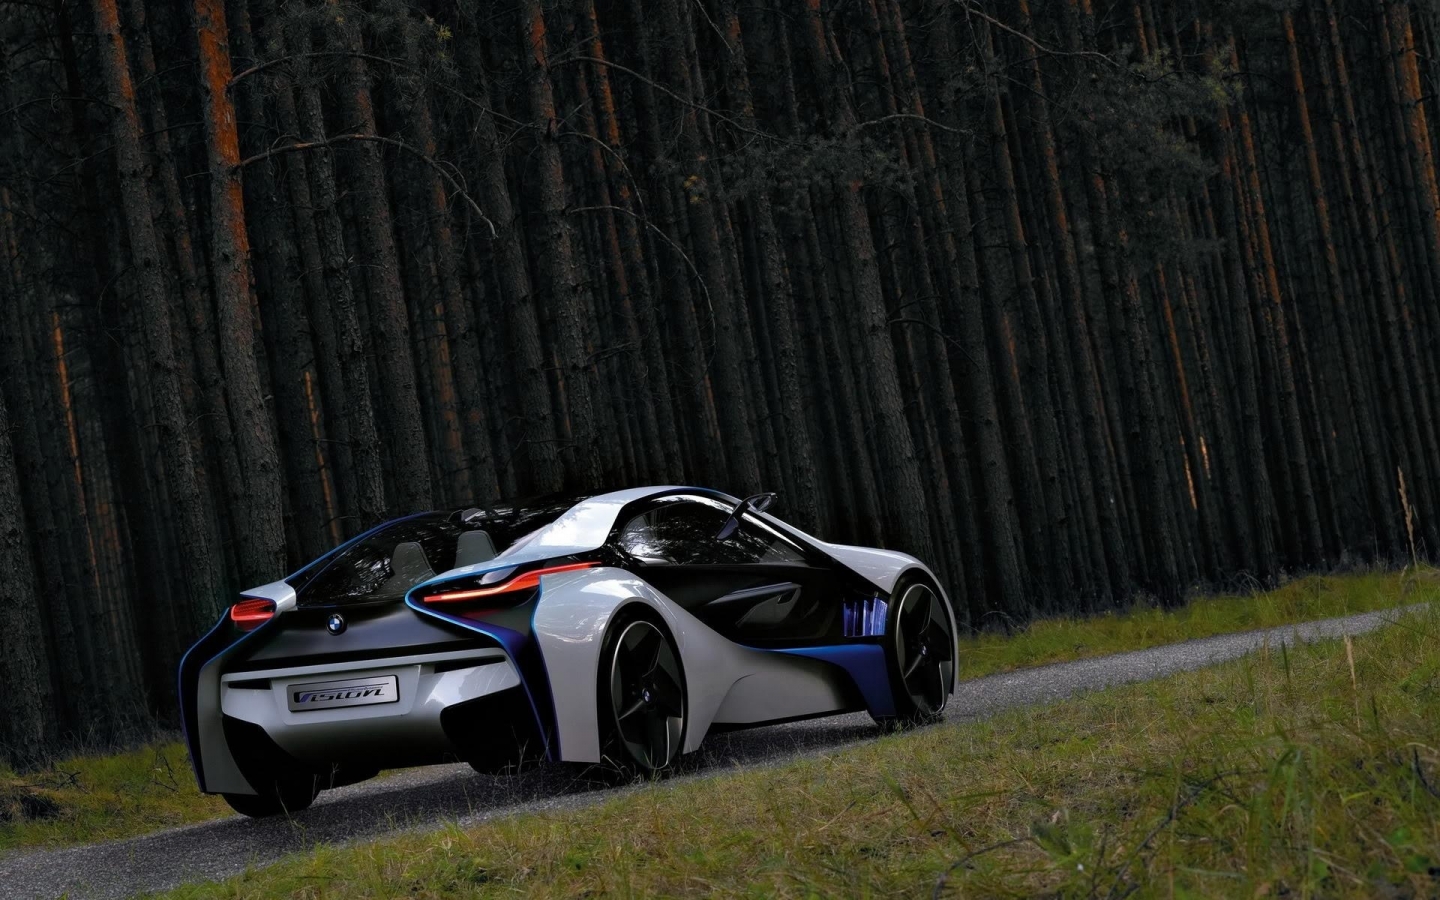 Amaizing BMW Vision Efficient Concept for 1440 x 900 widescreen resolution